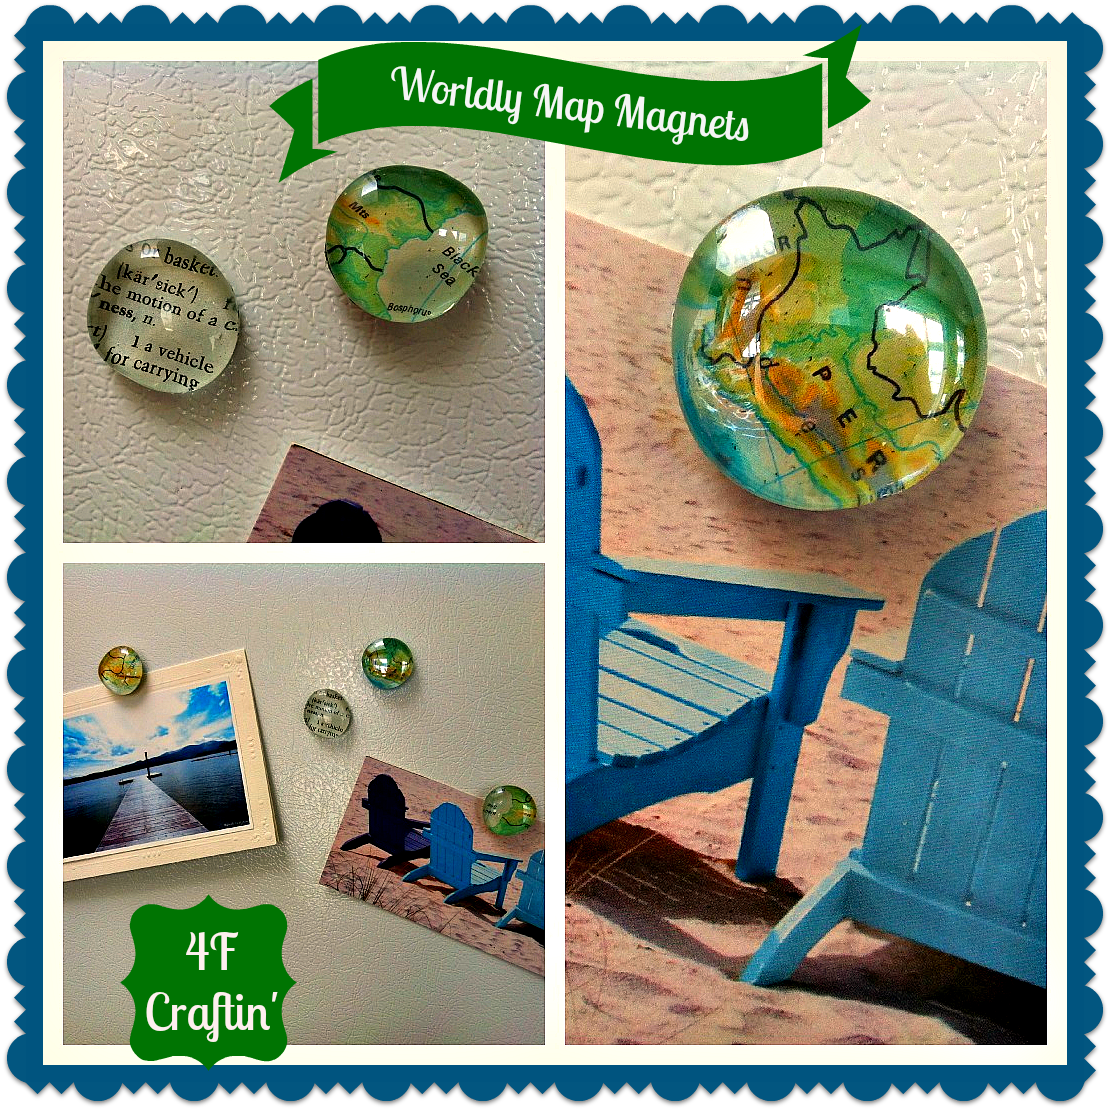 4F Craftin’: How-To Make Worldly Map Magnets